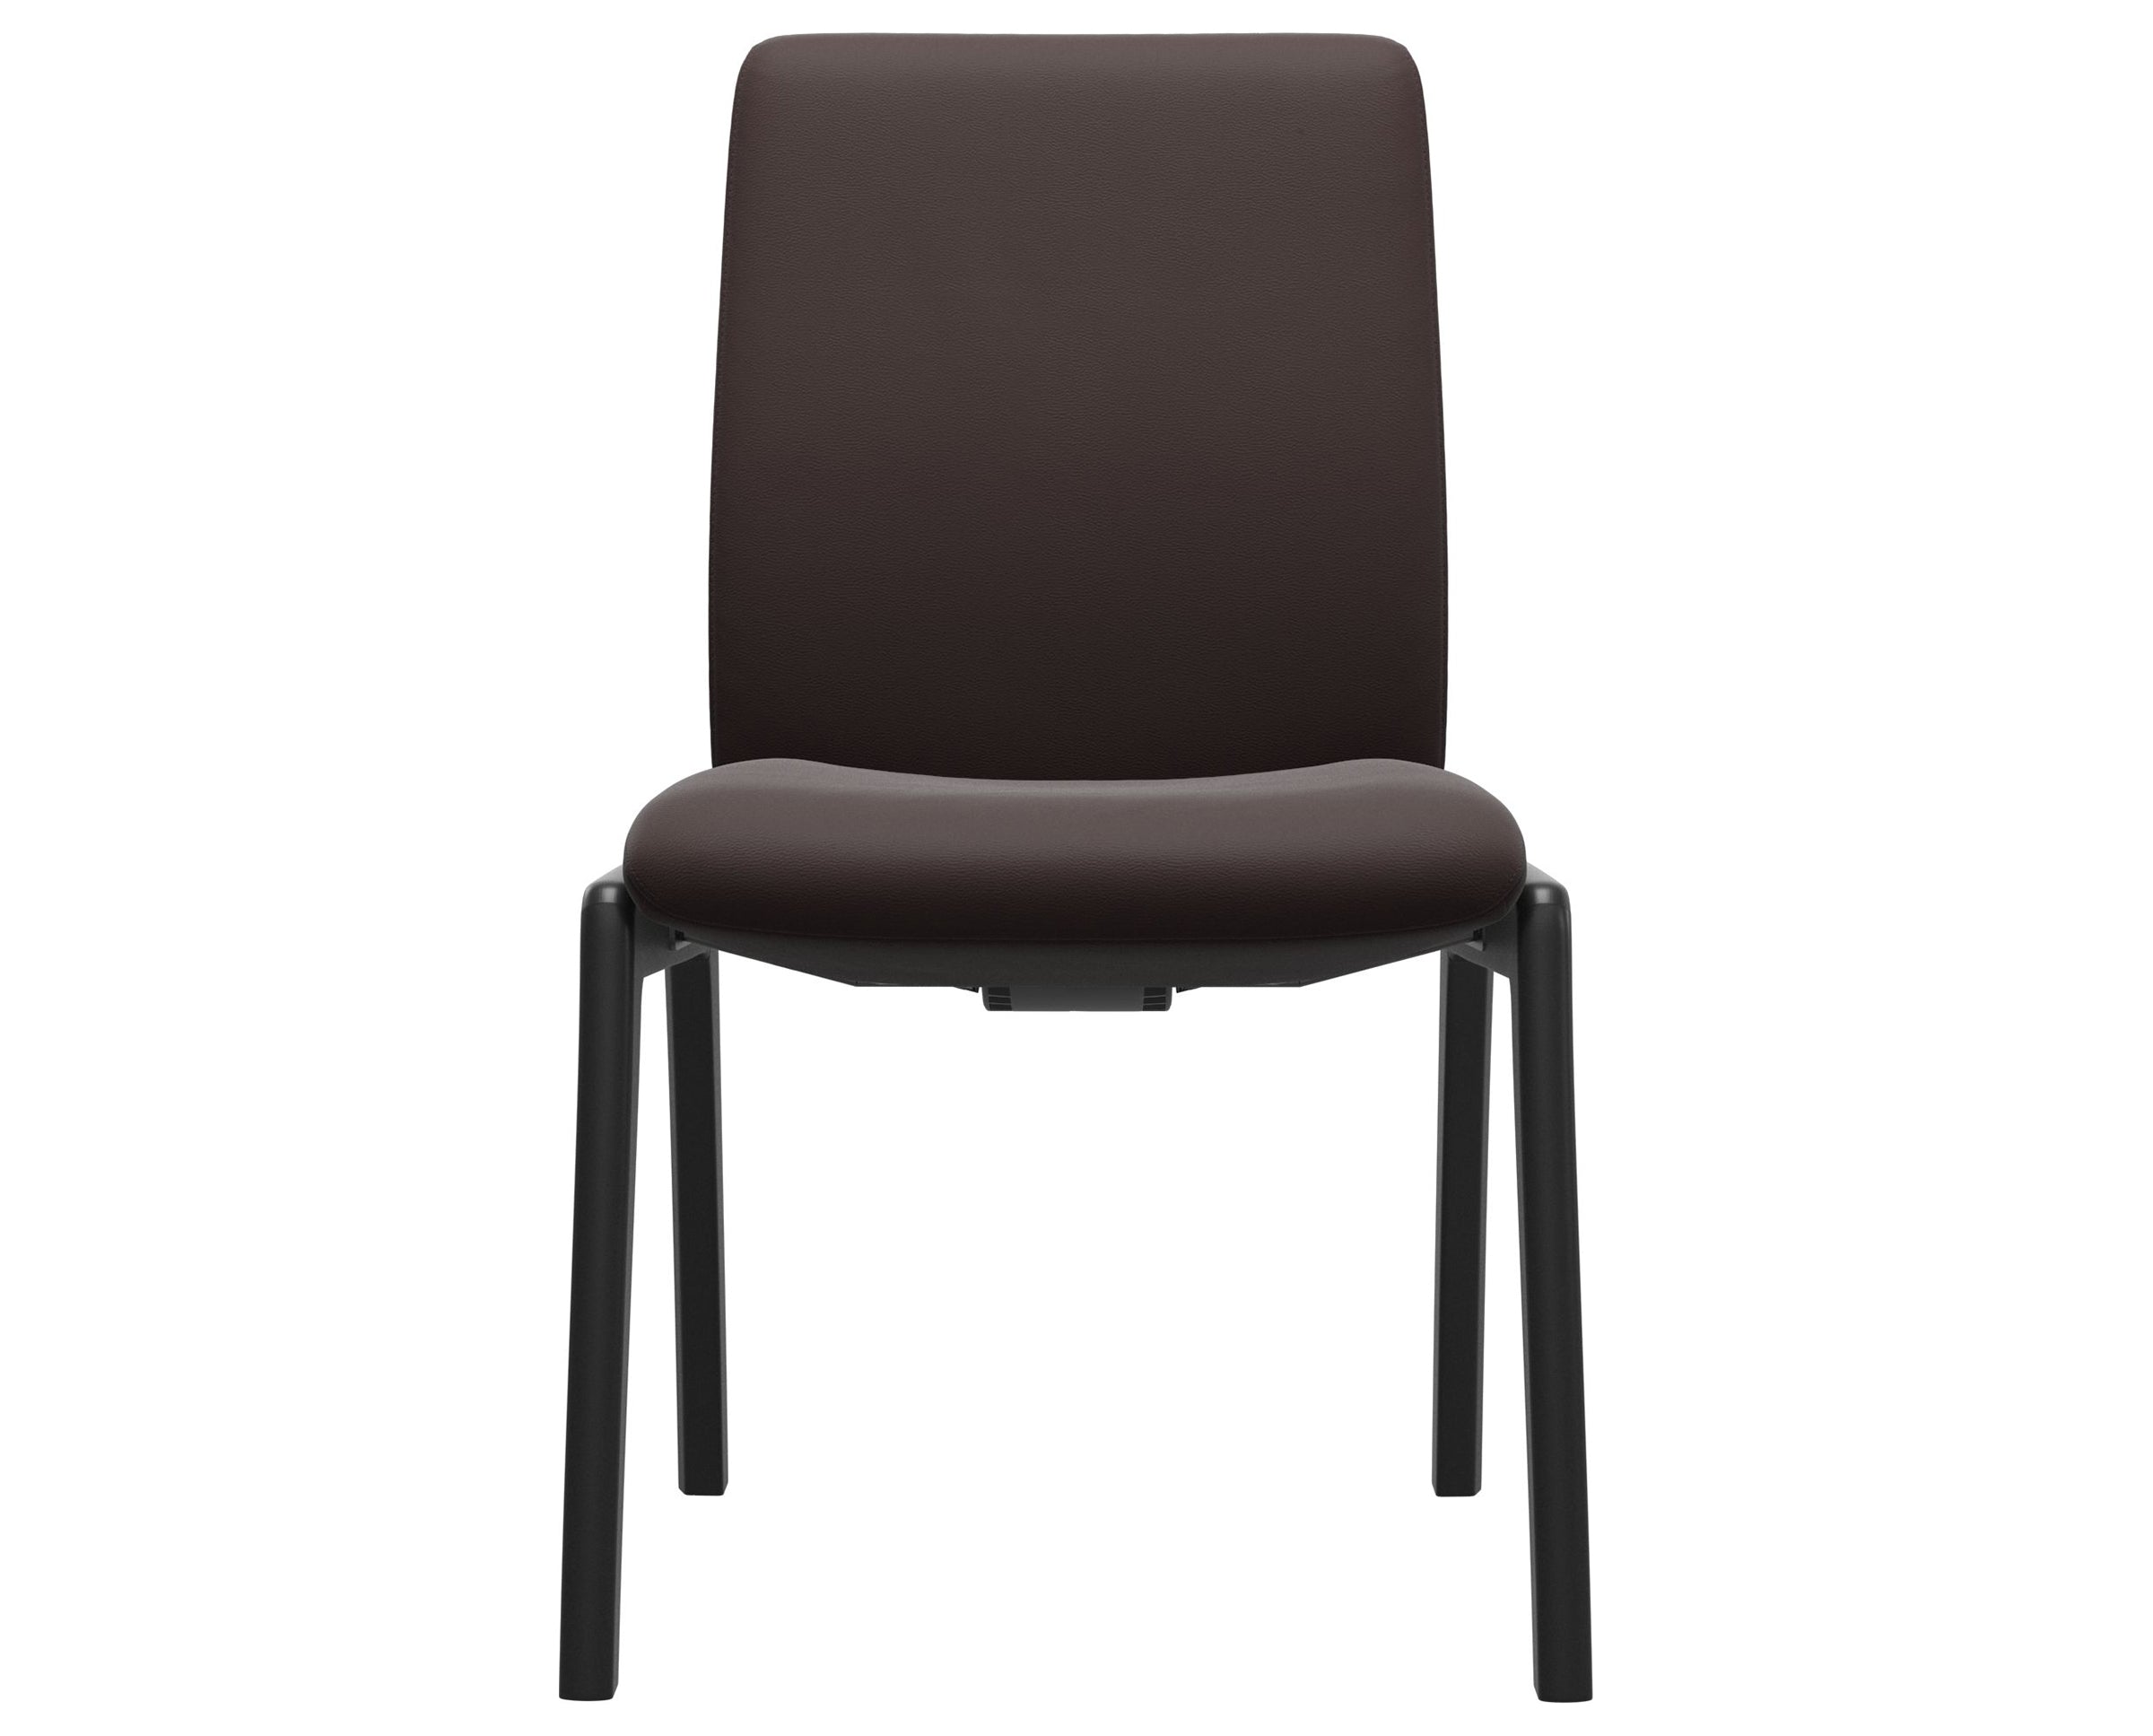 Paloma Leather Chocolate and Black Base | Stressless Laurel Low Back D100 Dining Chair | Valley Ridge Furniture